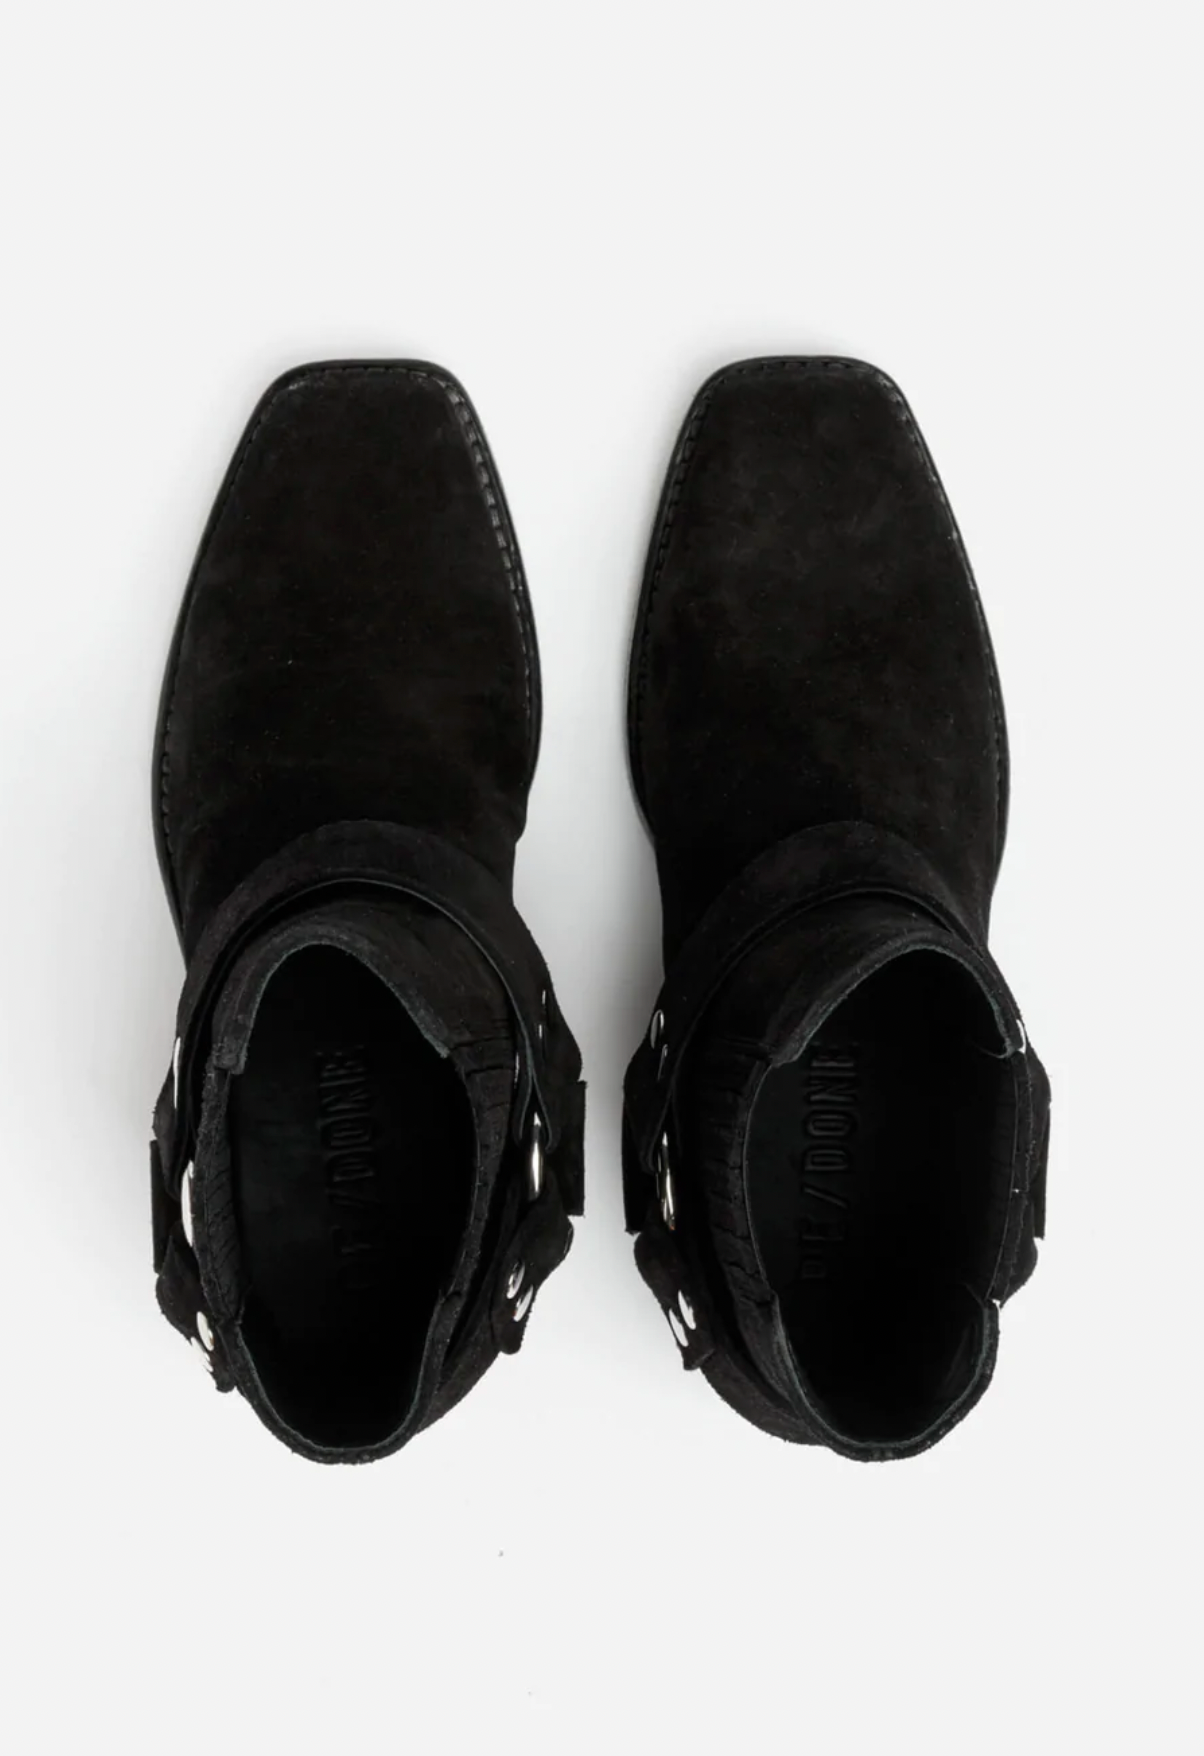 RE/DONE | Cavalry Boot - Black Suede